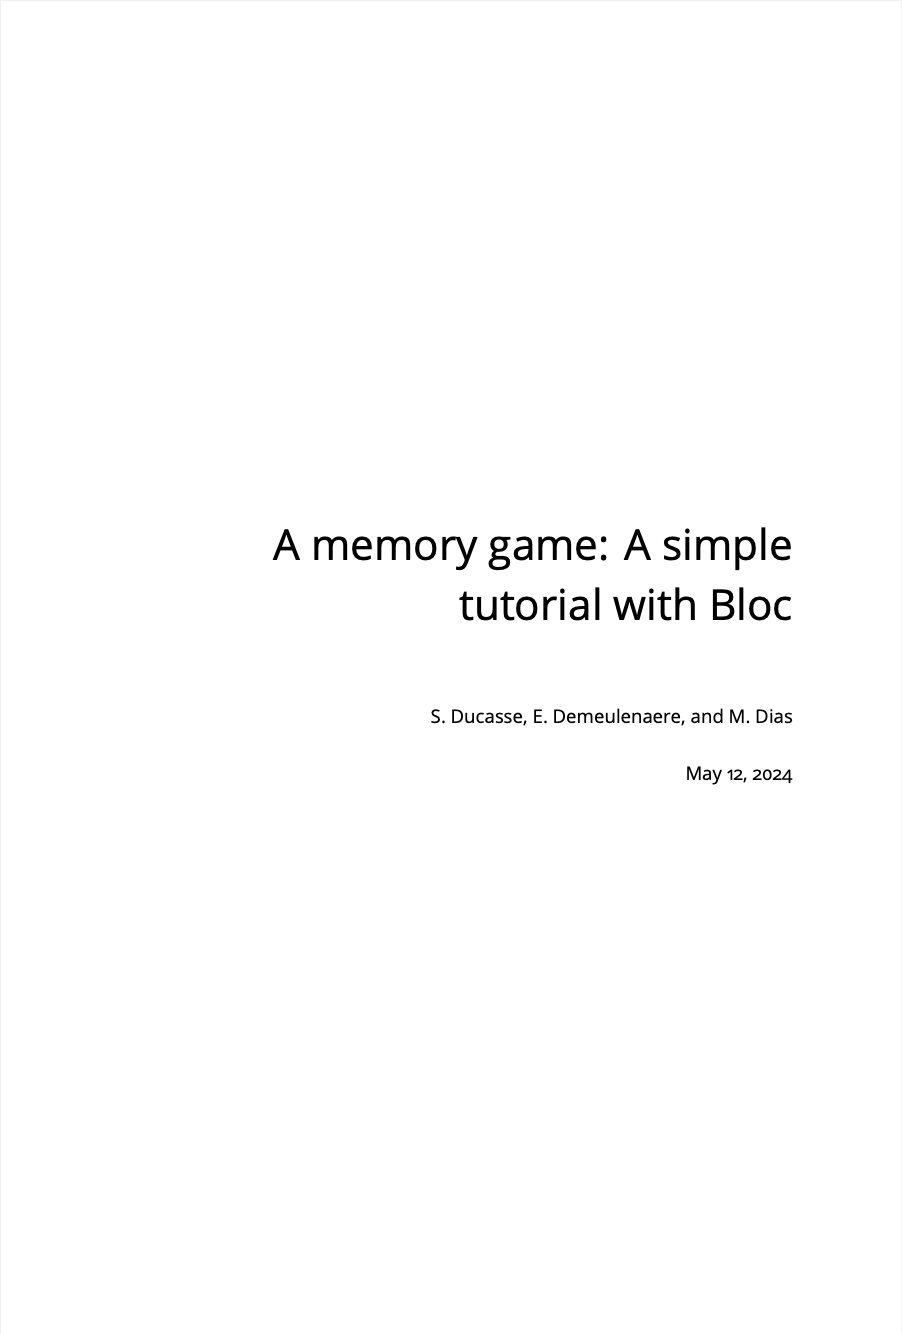 A memory game: A simple tutorial with Bloc